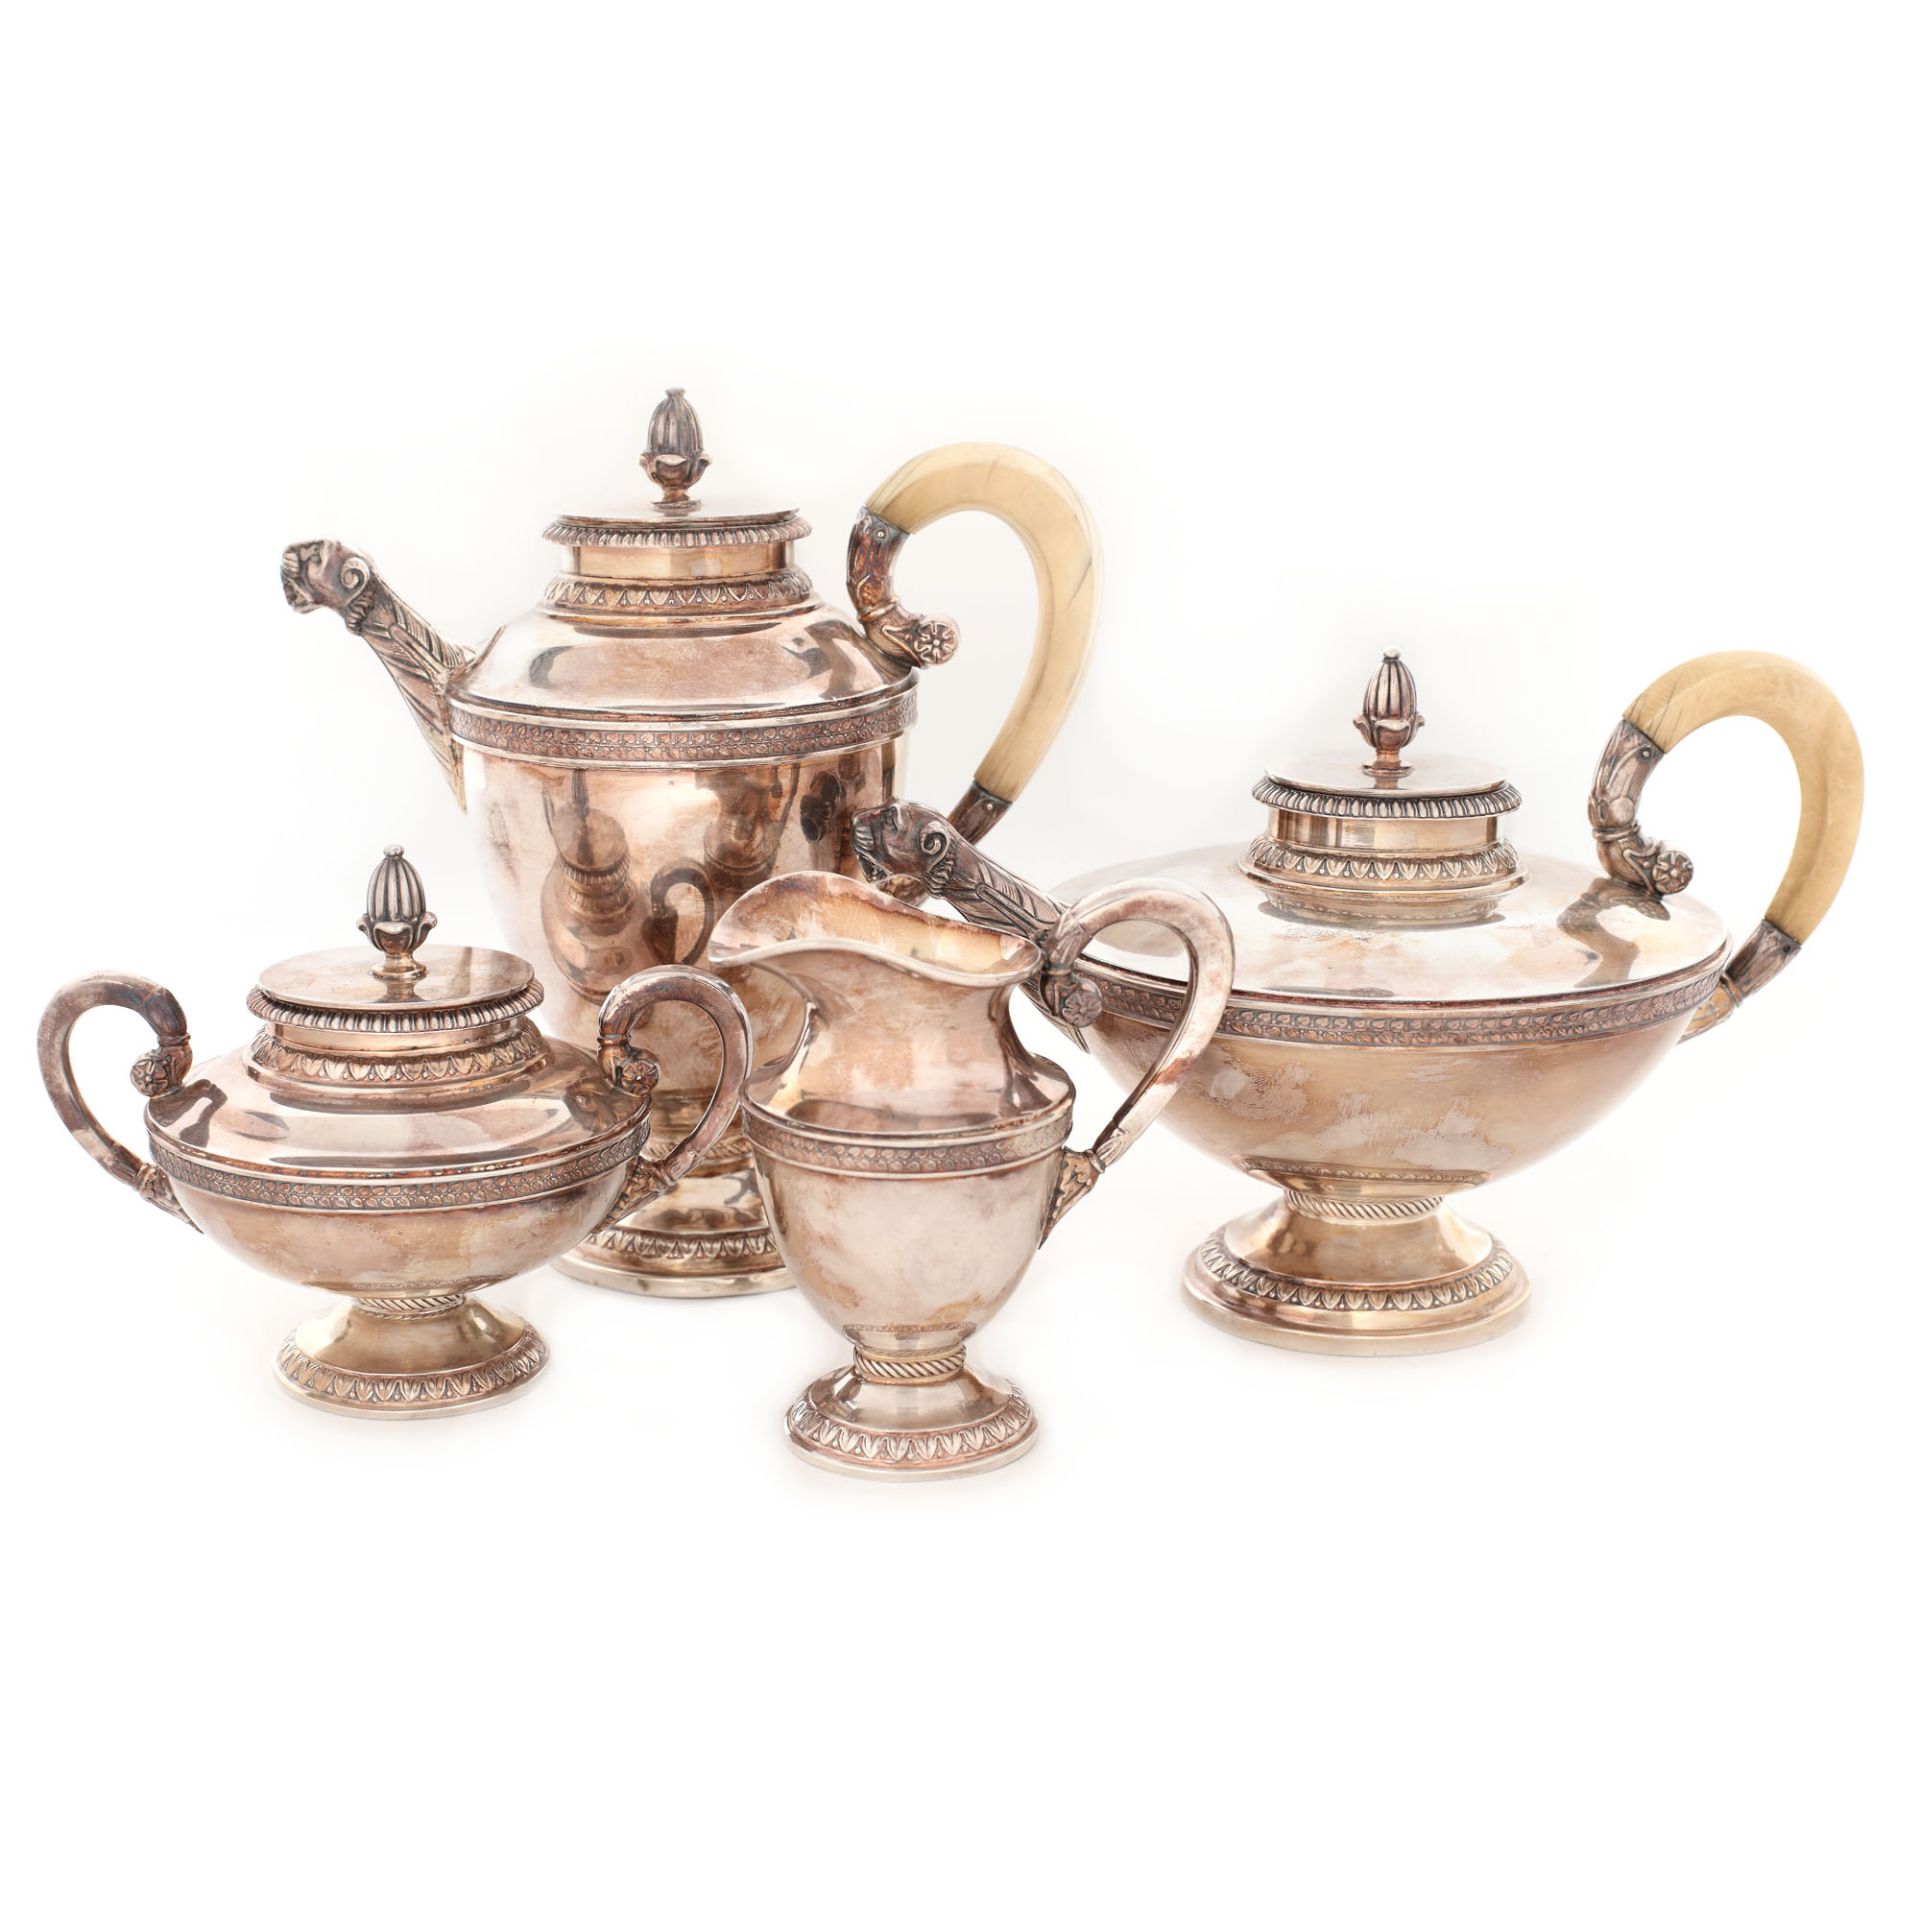 German workshop, Bruckmann & Söhne silver set, for tea or coffee, consisting of two teapots with ivo